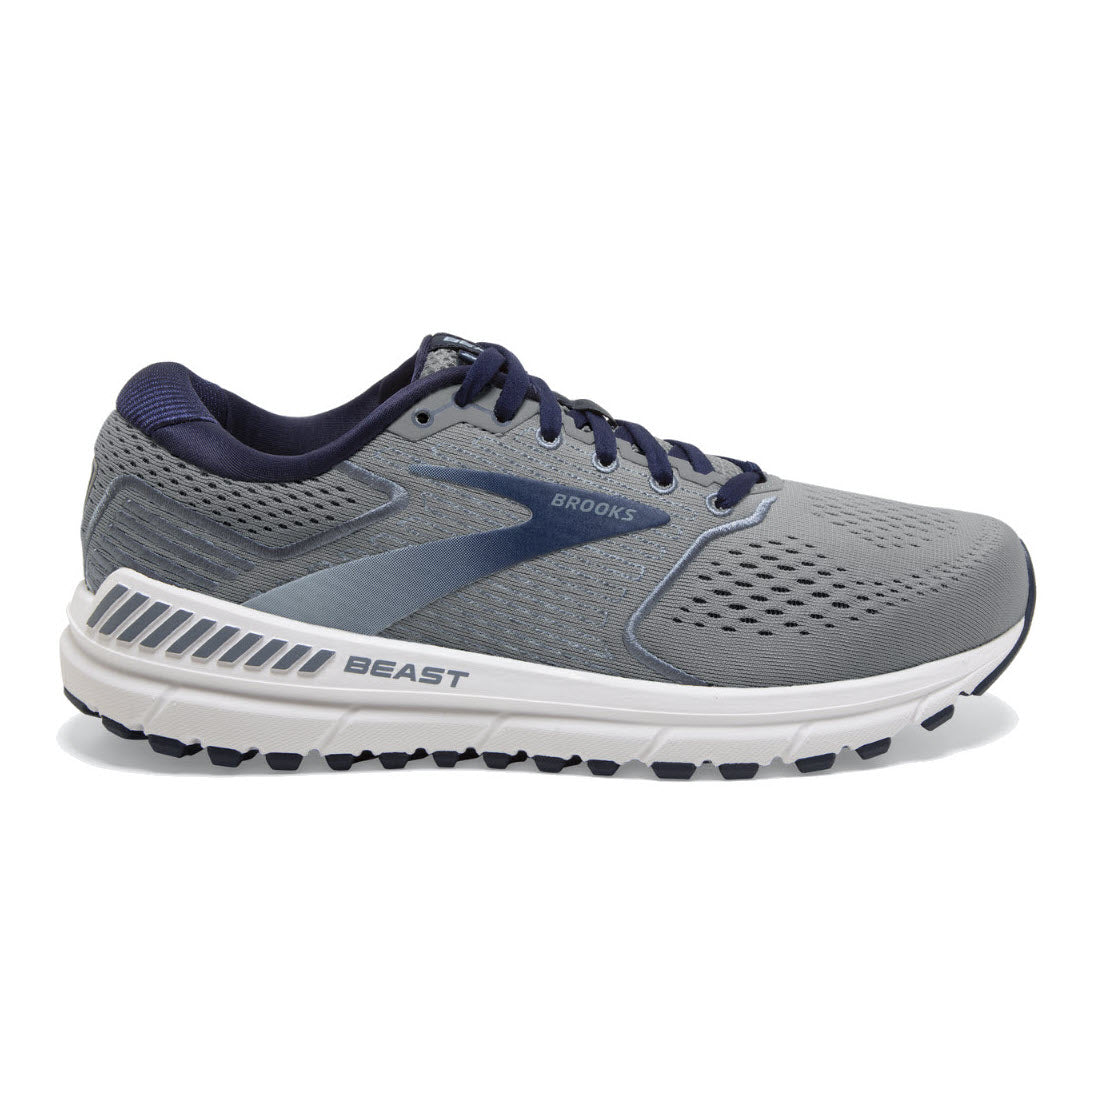 A BROOKS BEAST 20 BLUE/GREY - MENS men's running shoe, featuring a breathable mesh upper and BioMoGo DNA midsole.